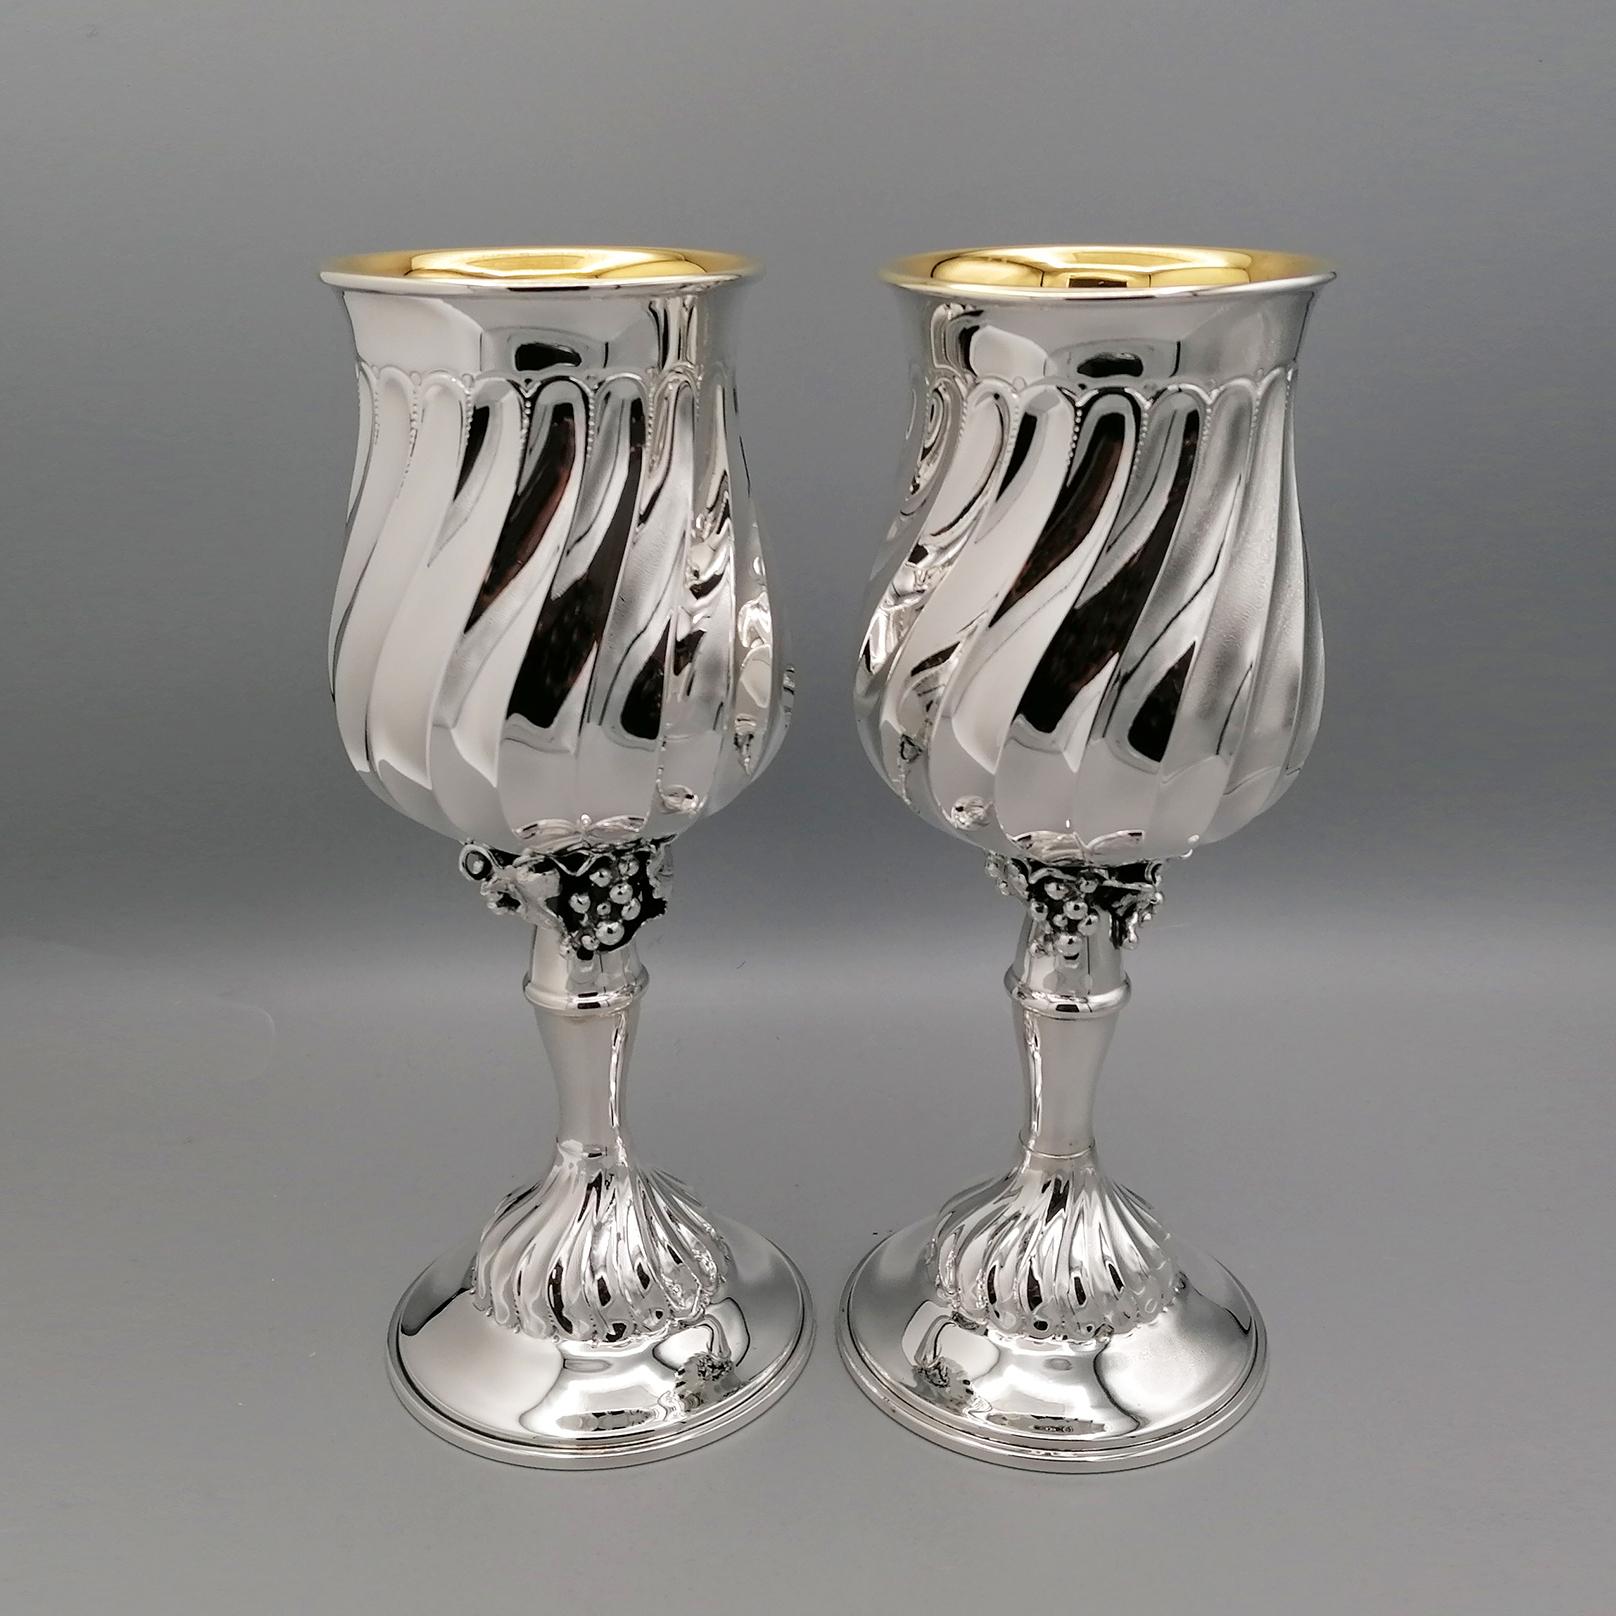 Pair of beakers in sterling silver.
The cup of the beaker is chiseled with a torchon motif and internally gilded.
Under the cup, just above the stem, bunches of grapes and vine leaves have been welded. These details were made with the casting